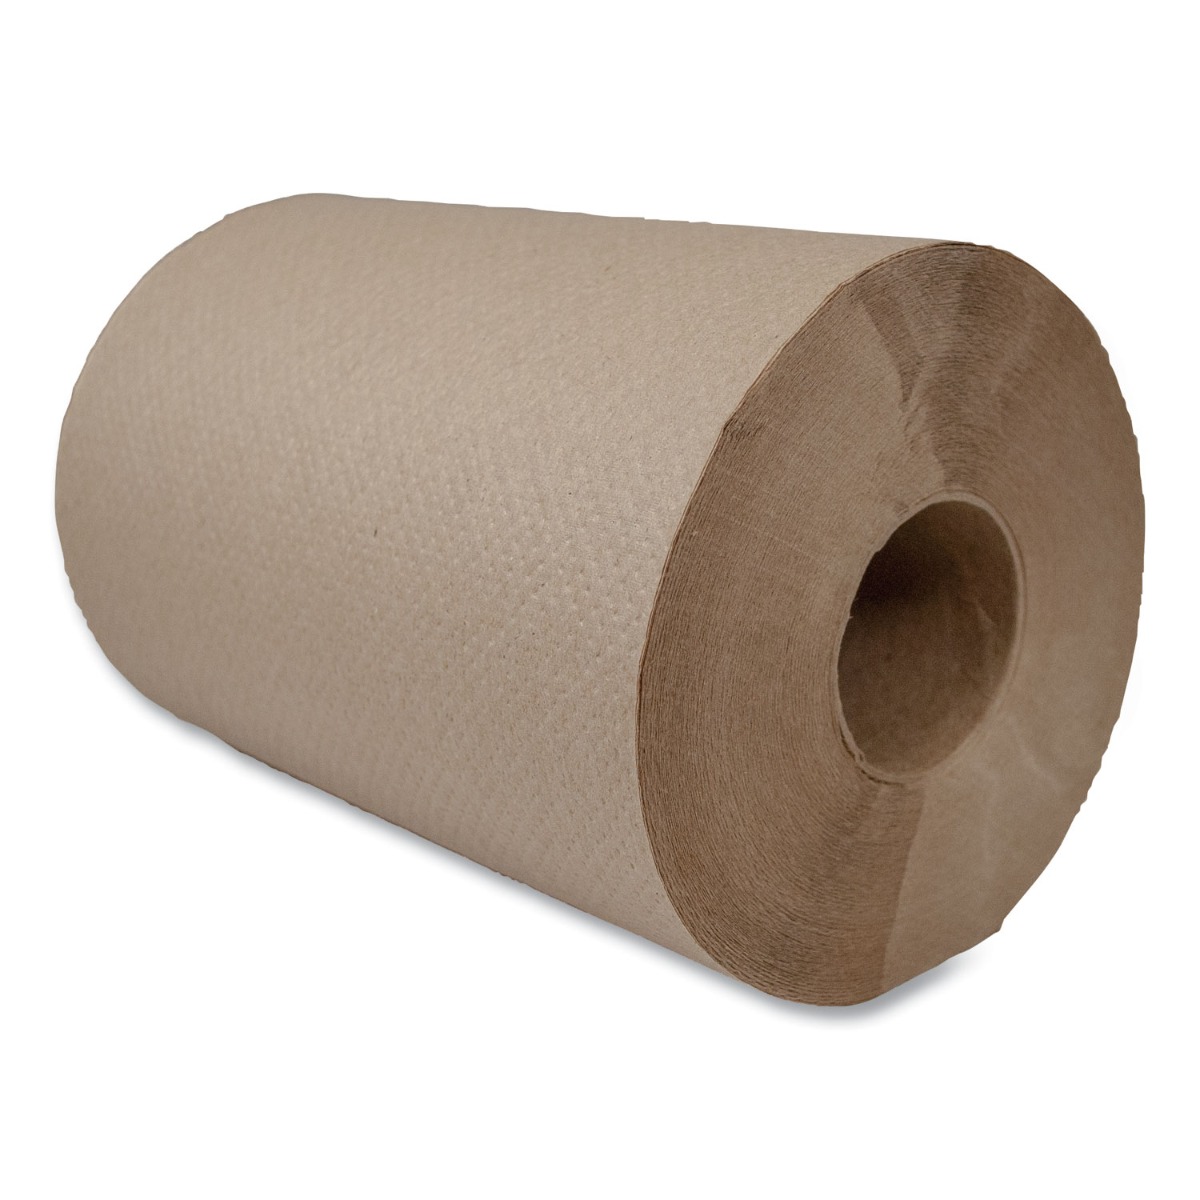 Morcon 8 in. x 350 ft. Brown Morsoft Universal Roll Paper Towels (12  Rolls/Carton) MORR12350 - The Home Depot